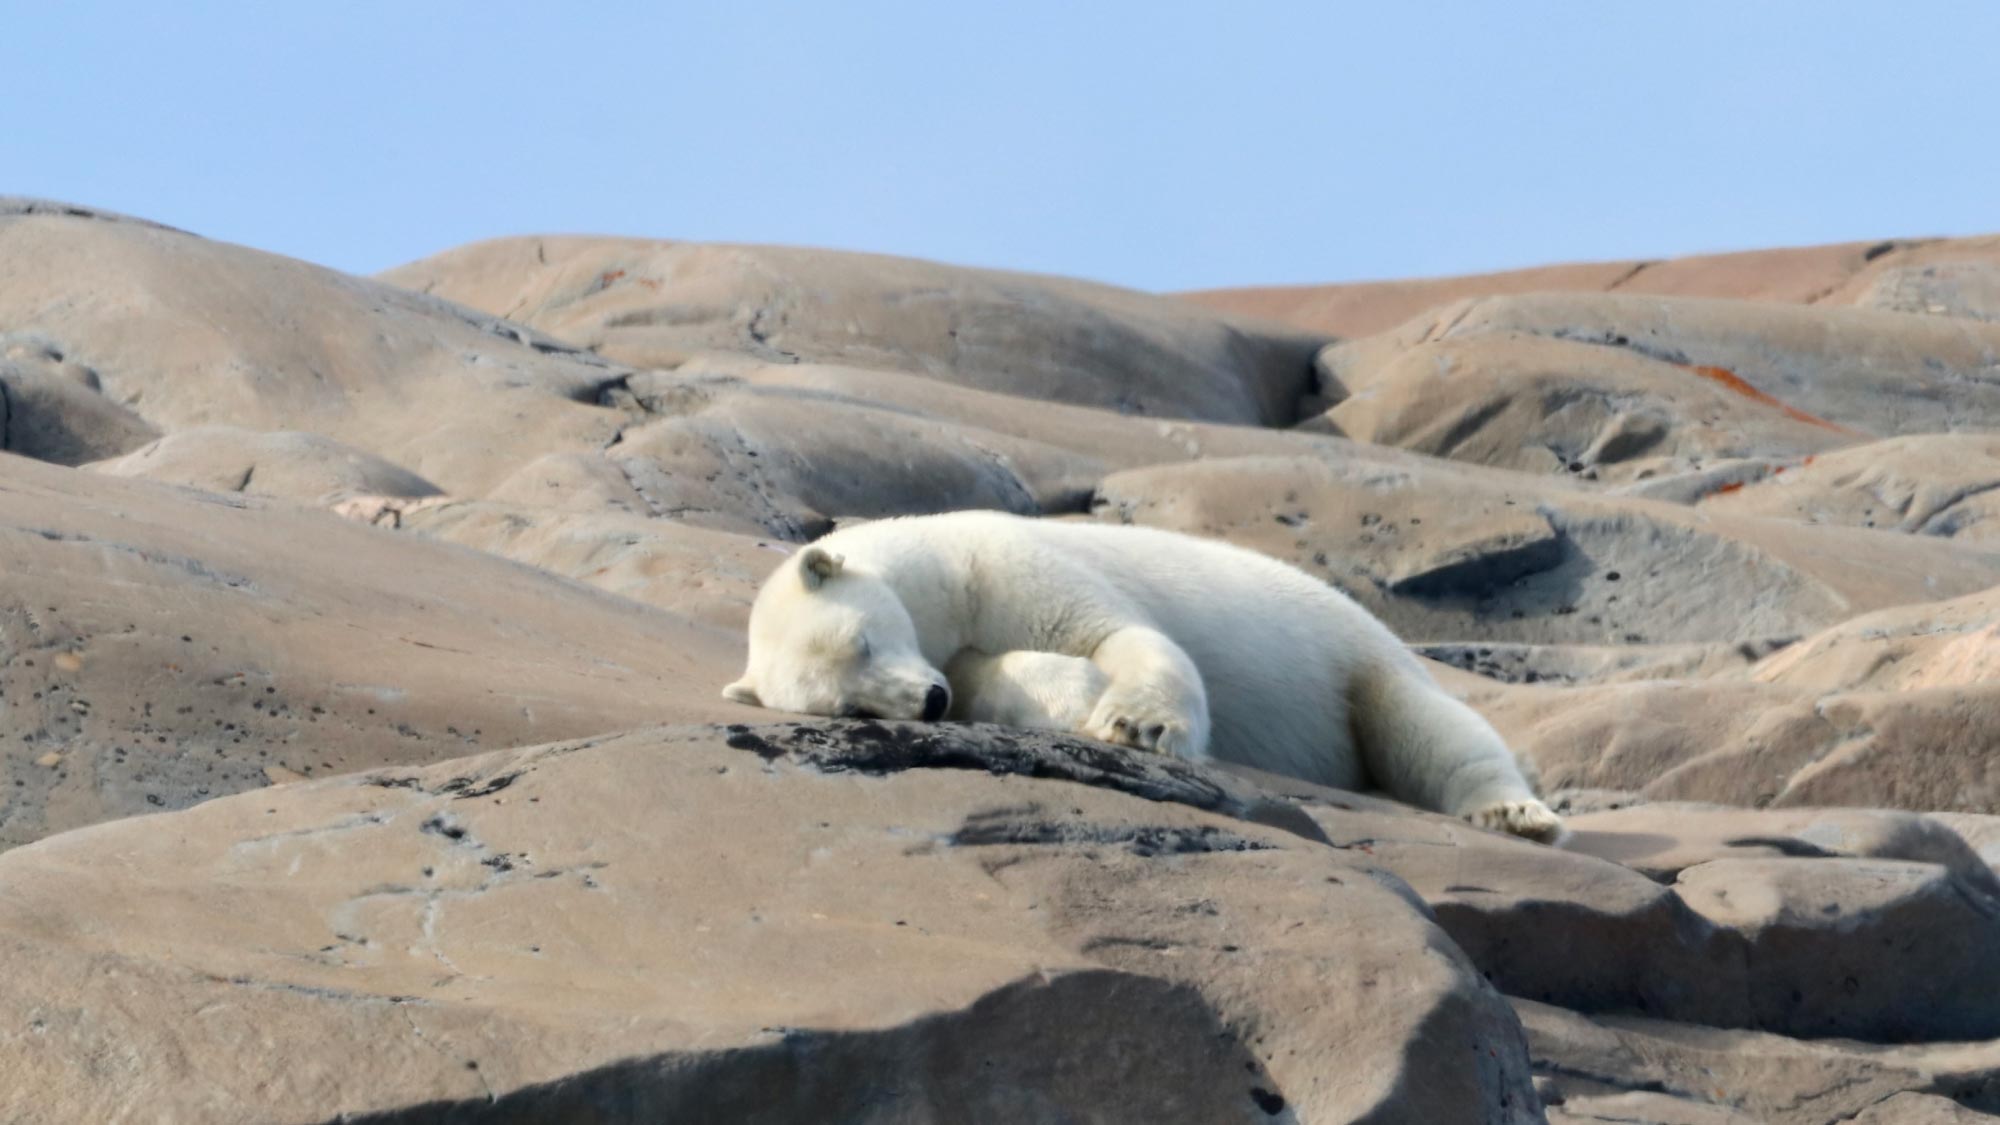 Polar bears observed during guided tour in the Arctic.